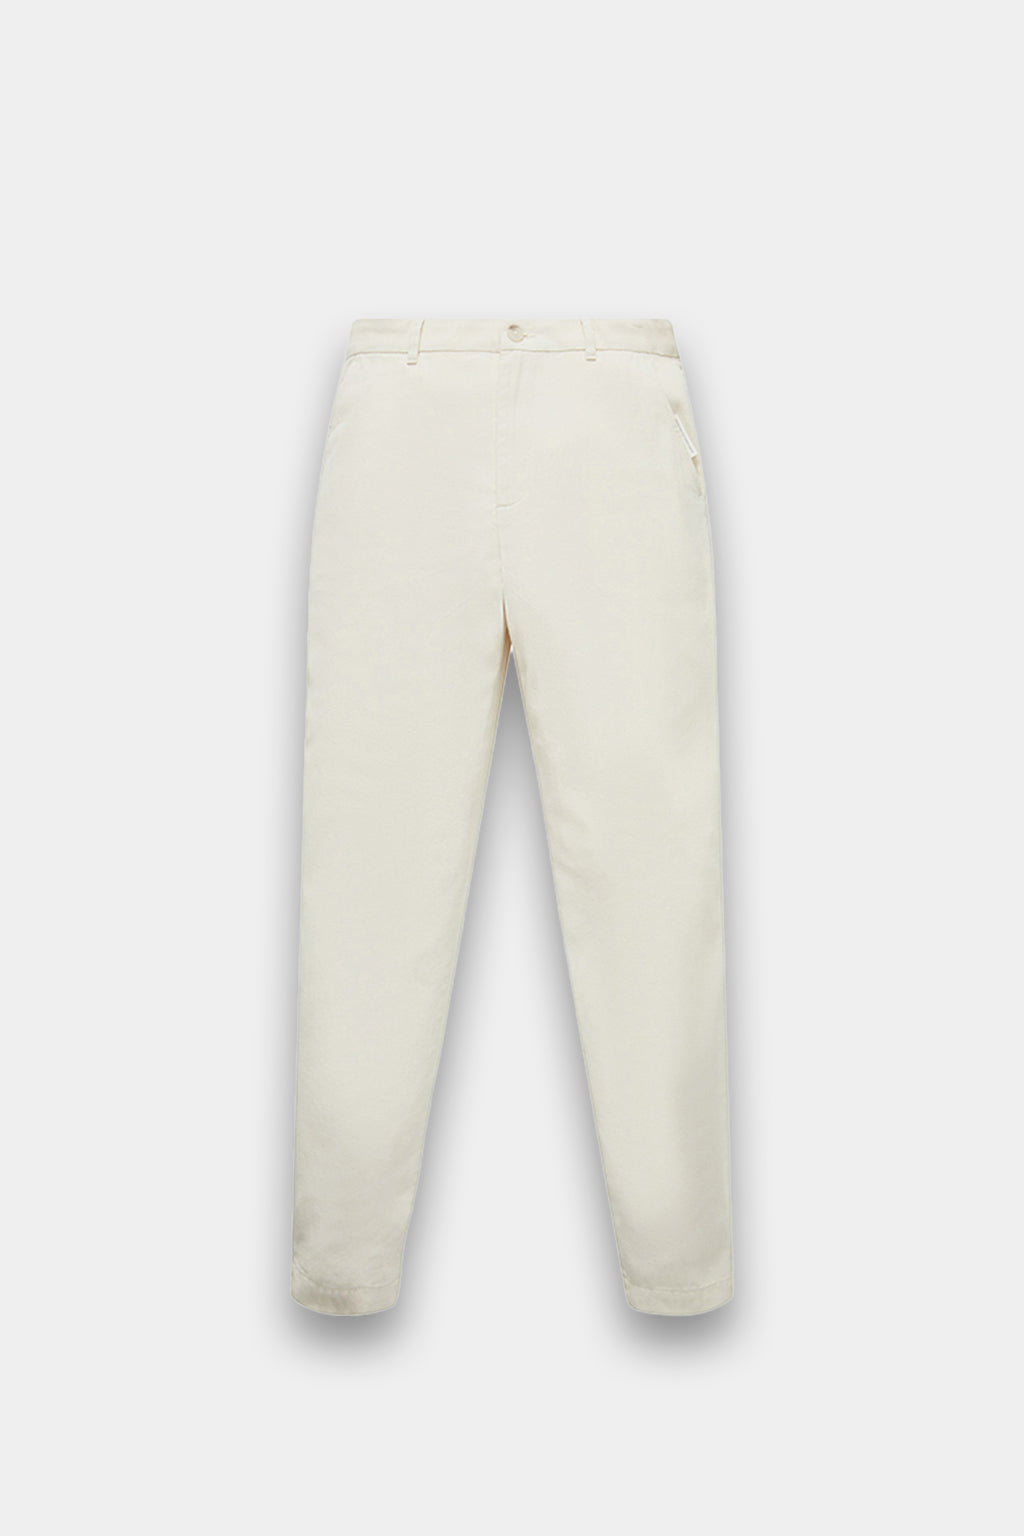 Tom Tailor - Solid Relaxed Fit Chino Pants